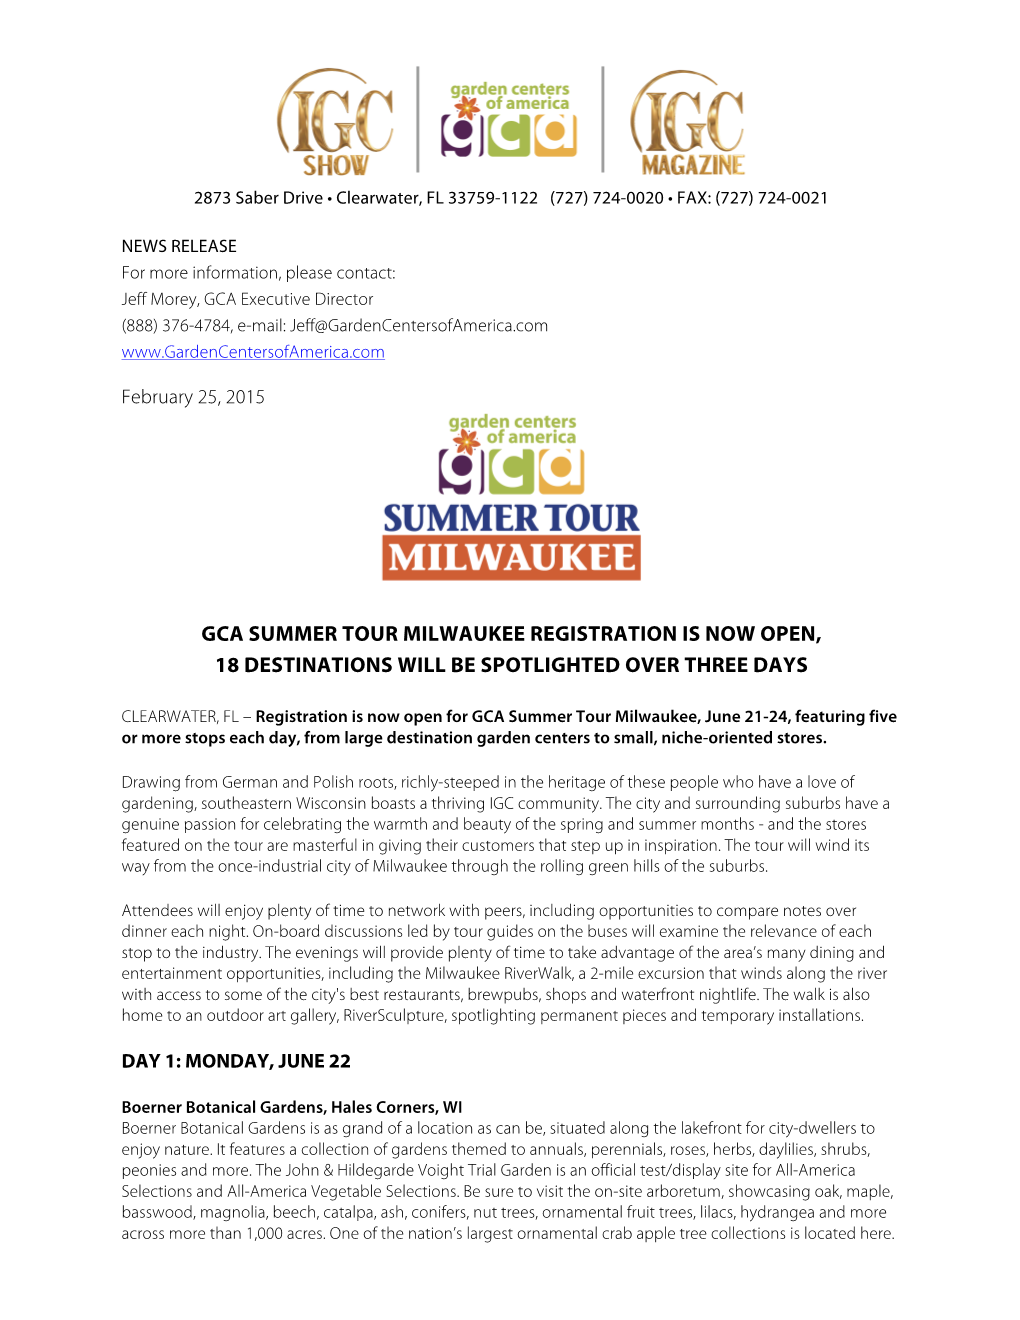 Gca Summer Tour Milwaukee Registration Is Now Open, 18 Destinations Will Be Spotlighted Over Three Days